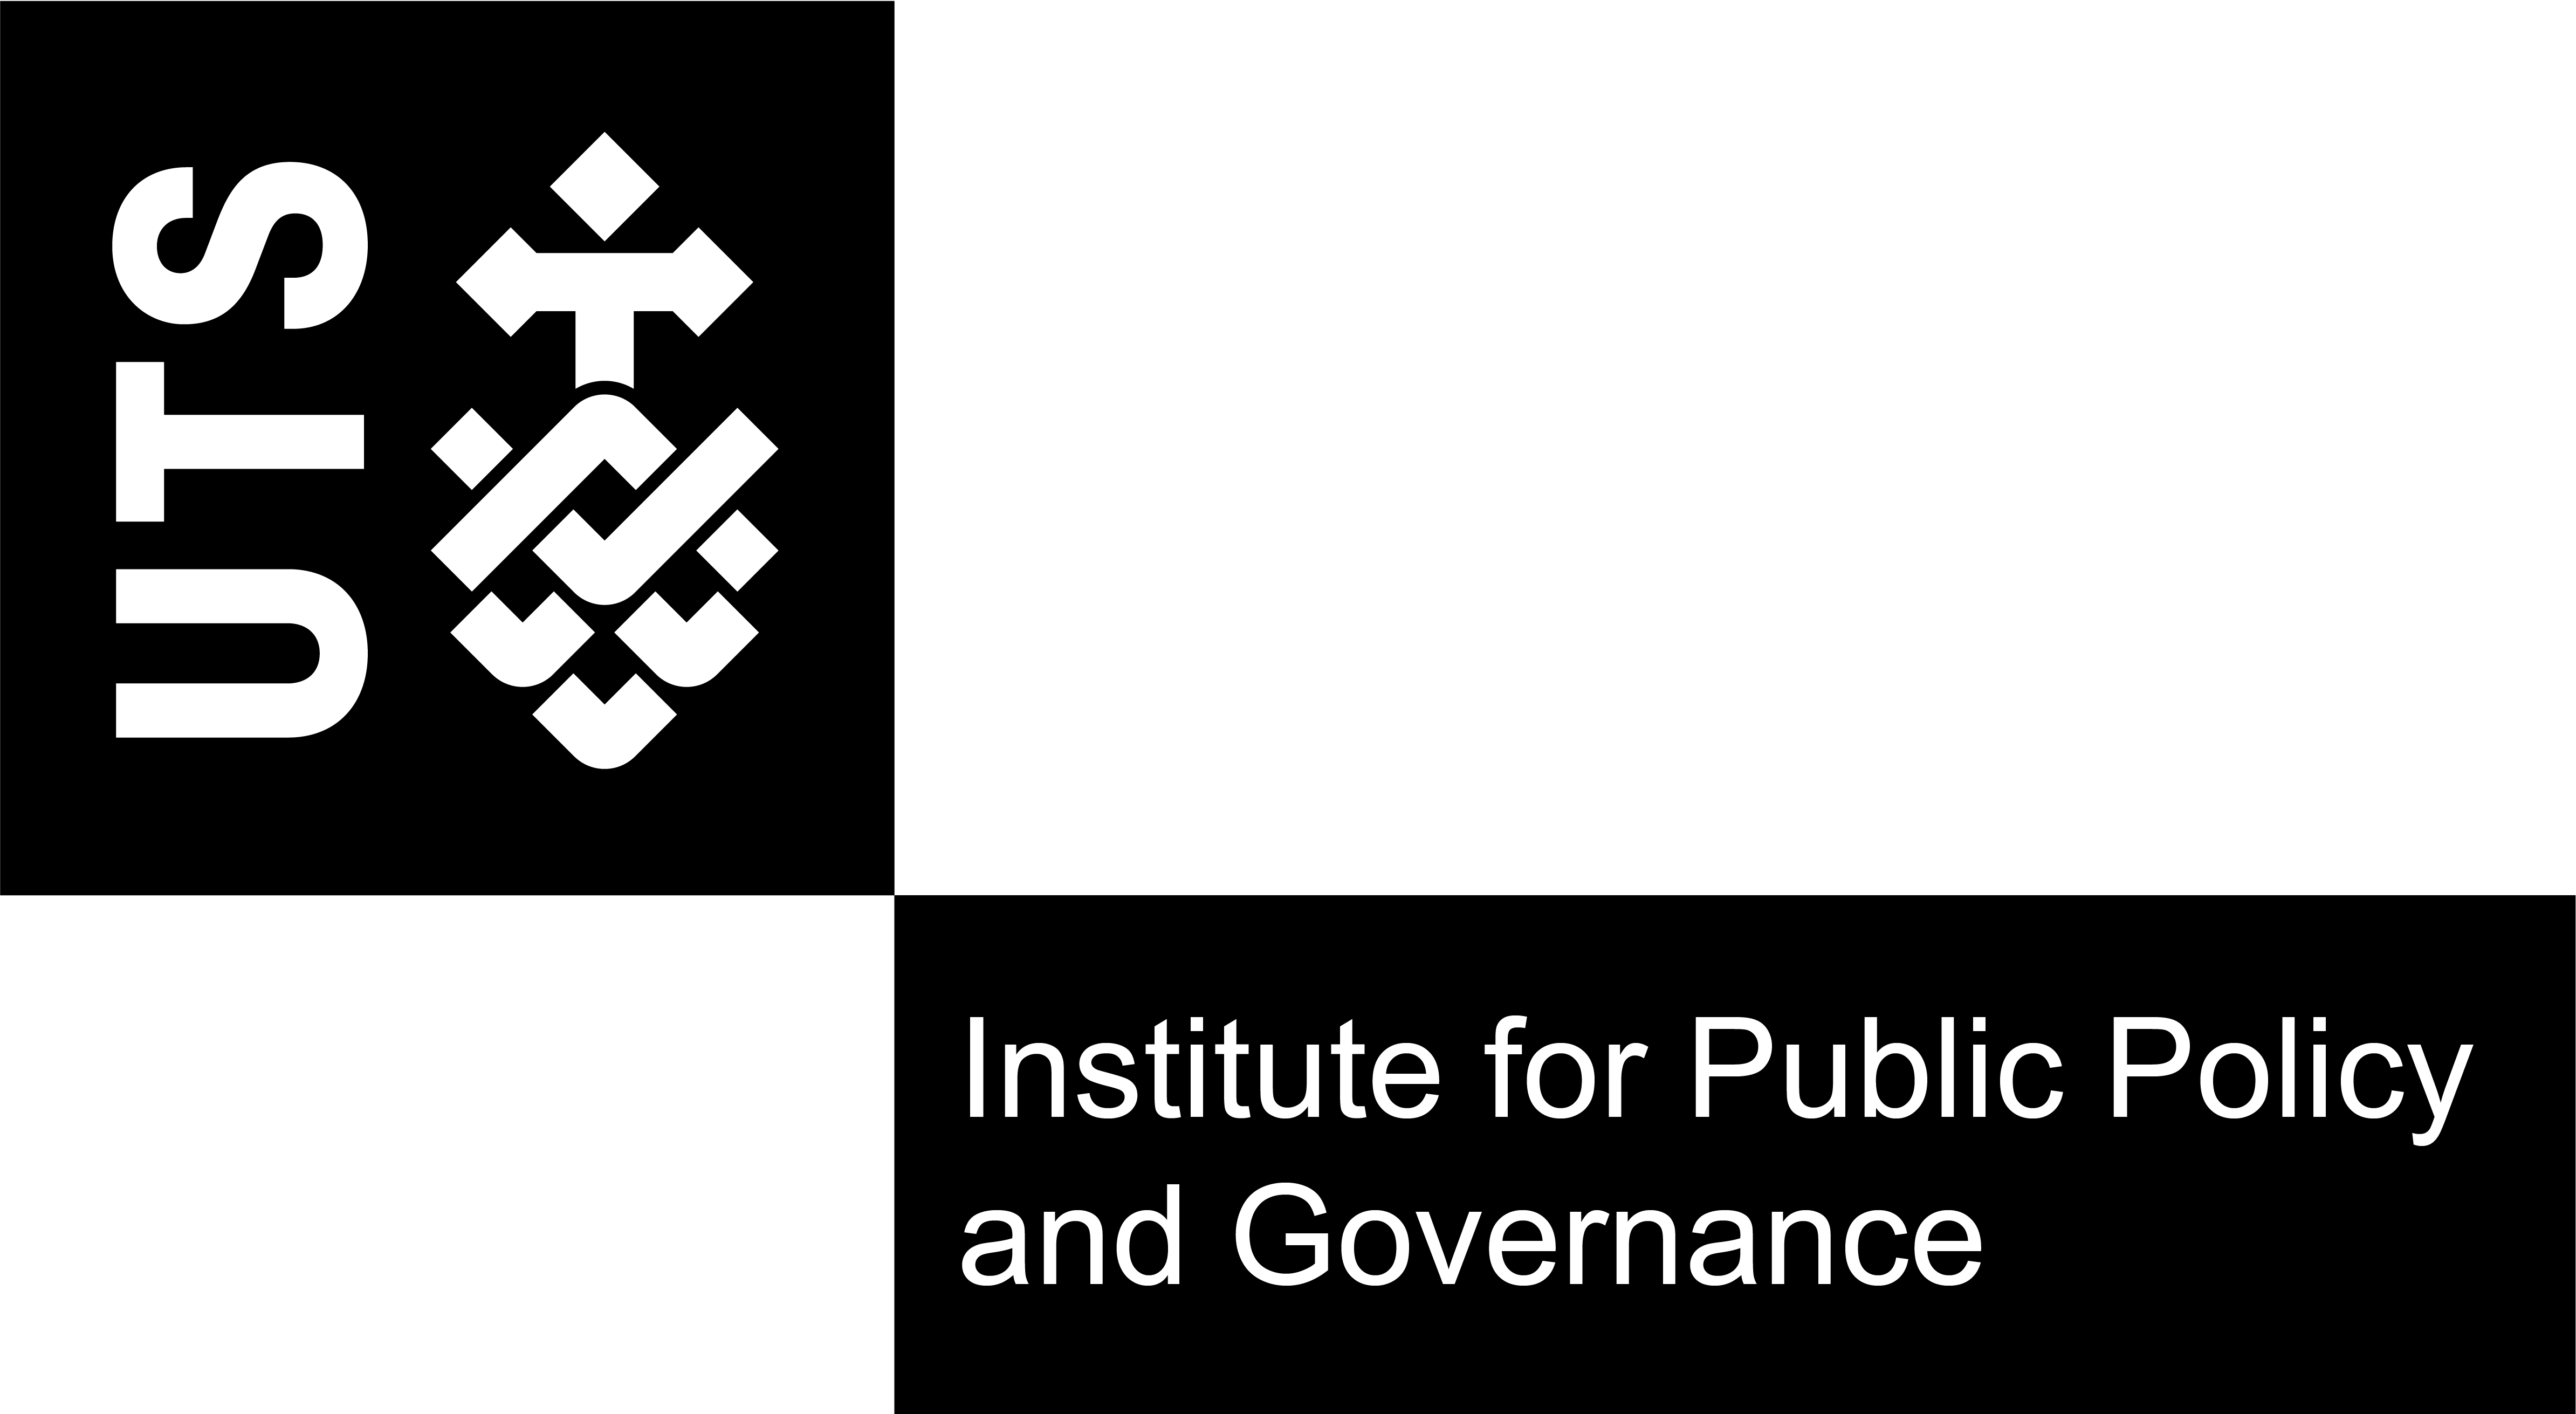 Institute for Public Policy and Governance